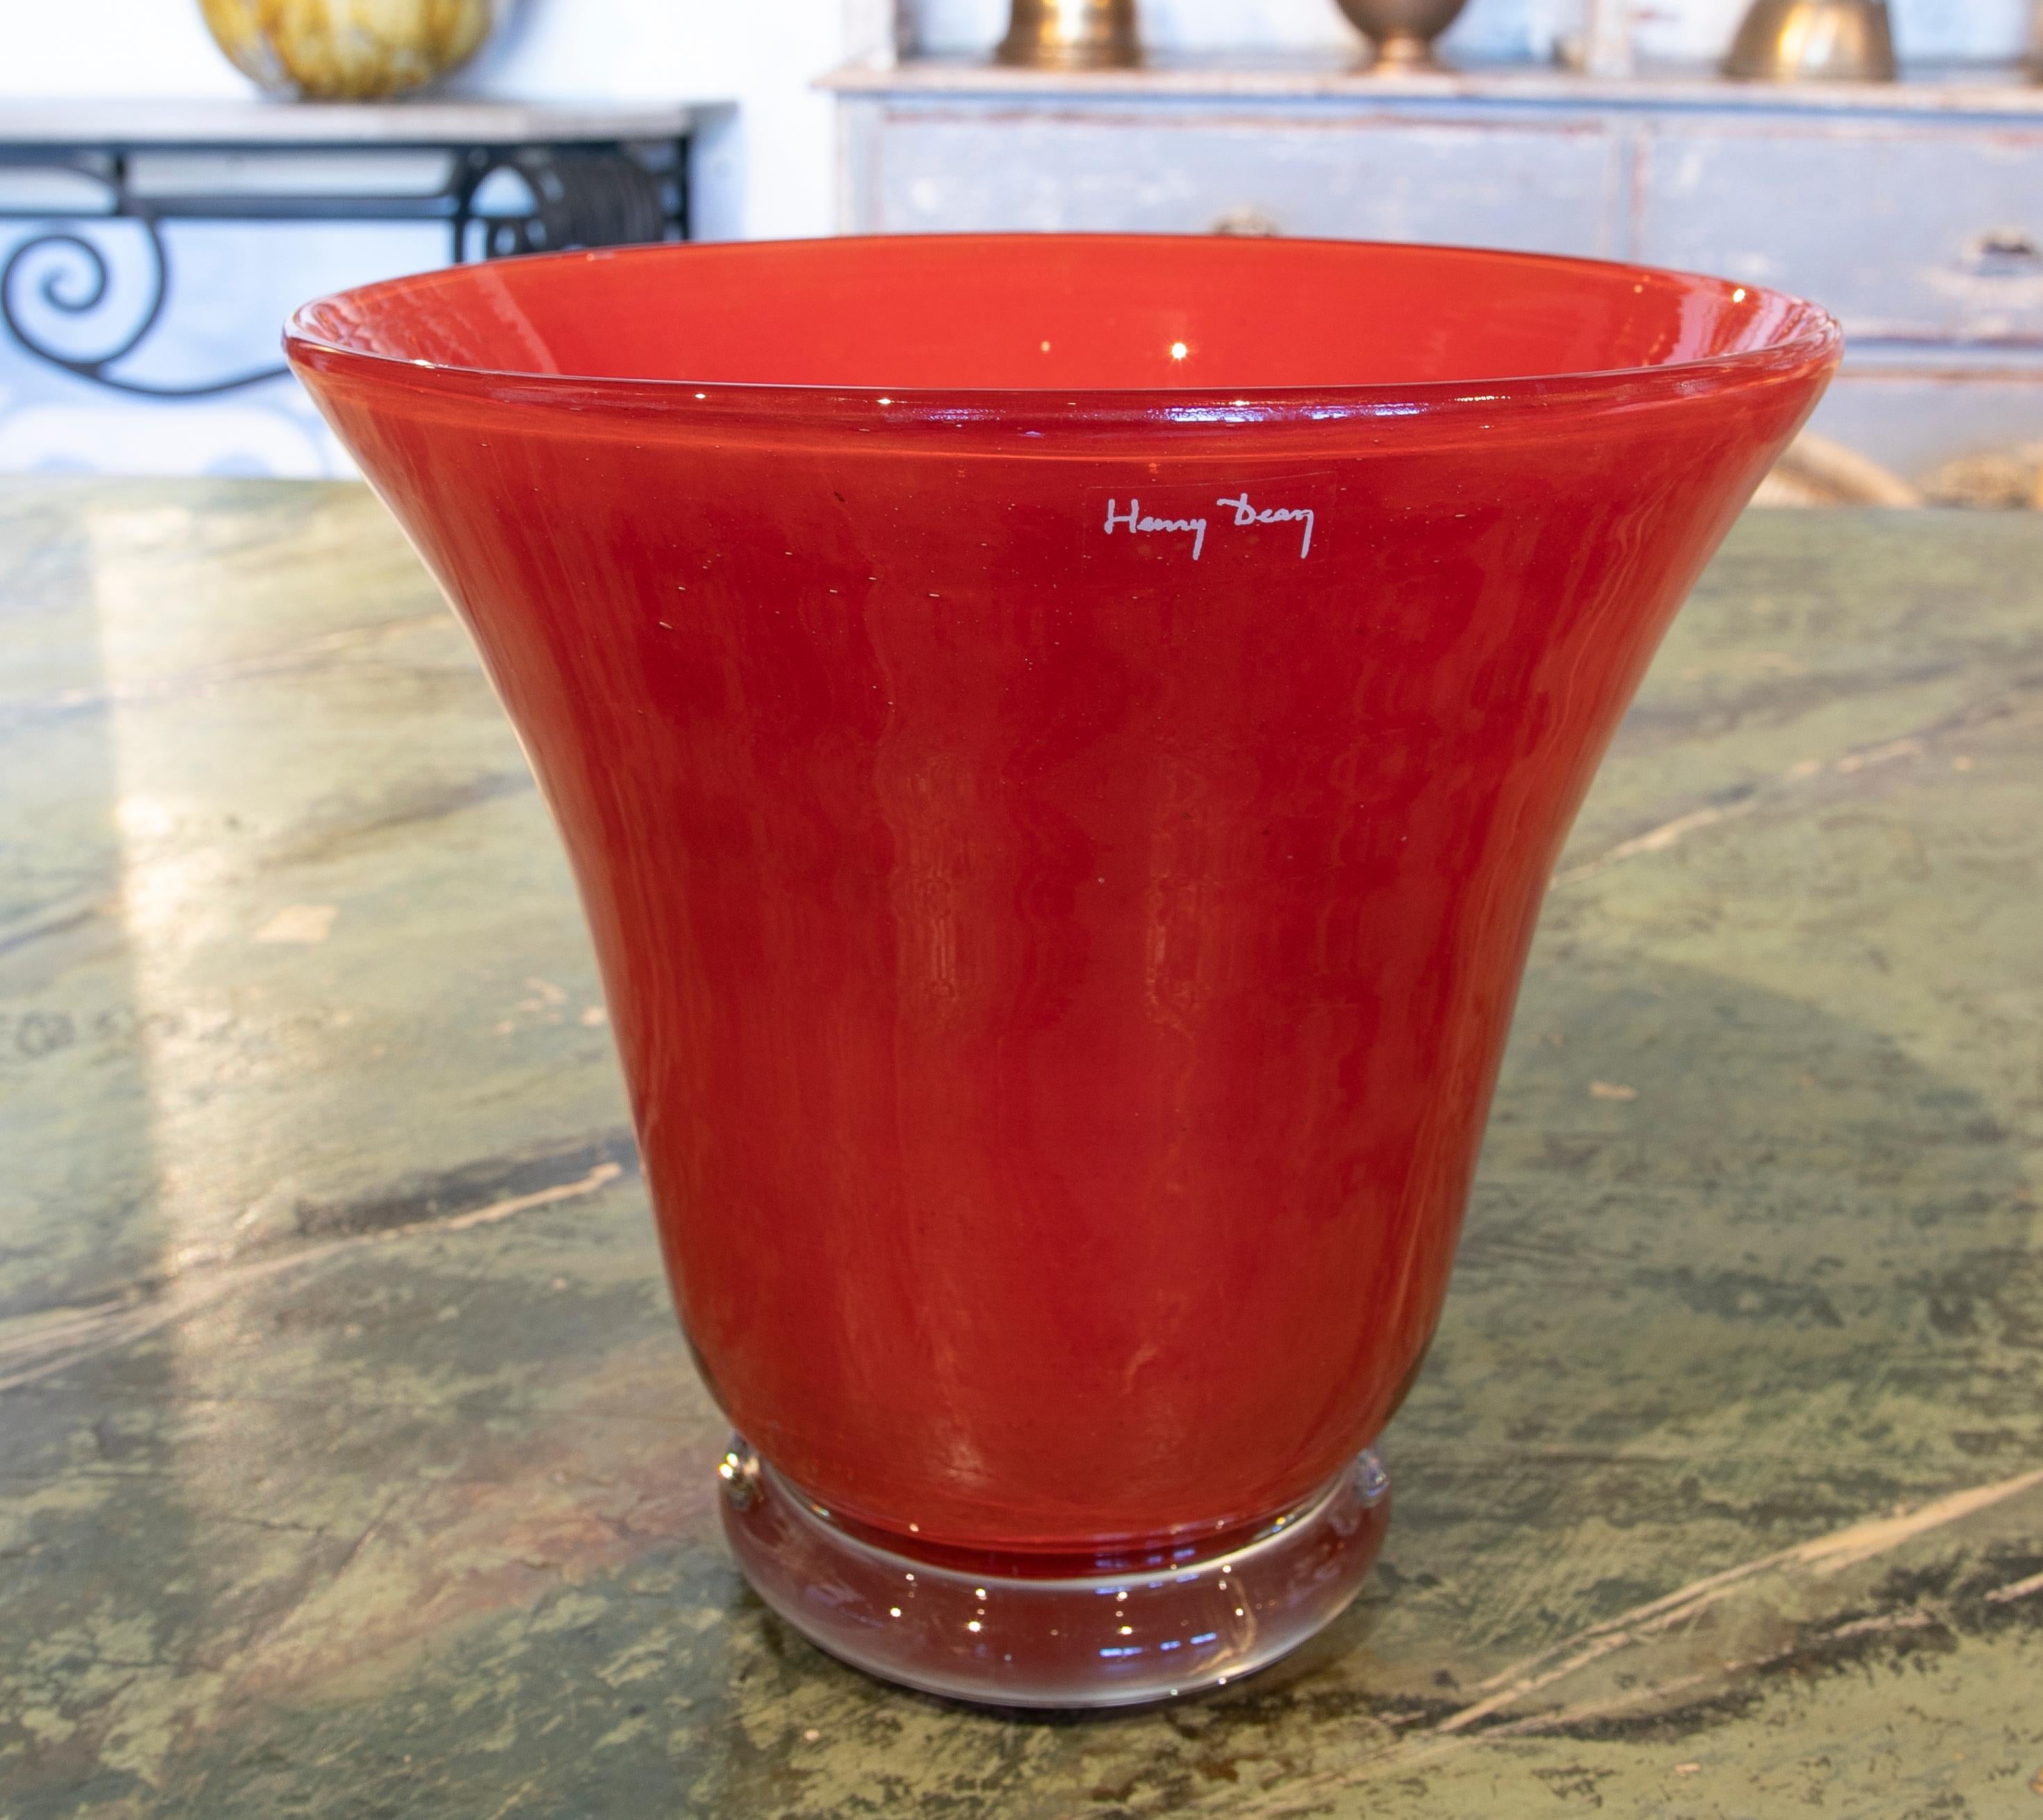 French Handmade Red Glass Vase Signed by Henry Dean For Sale